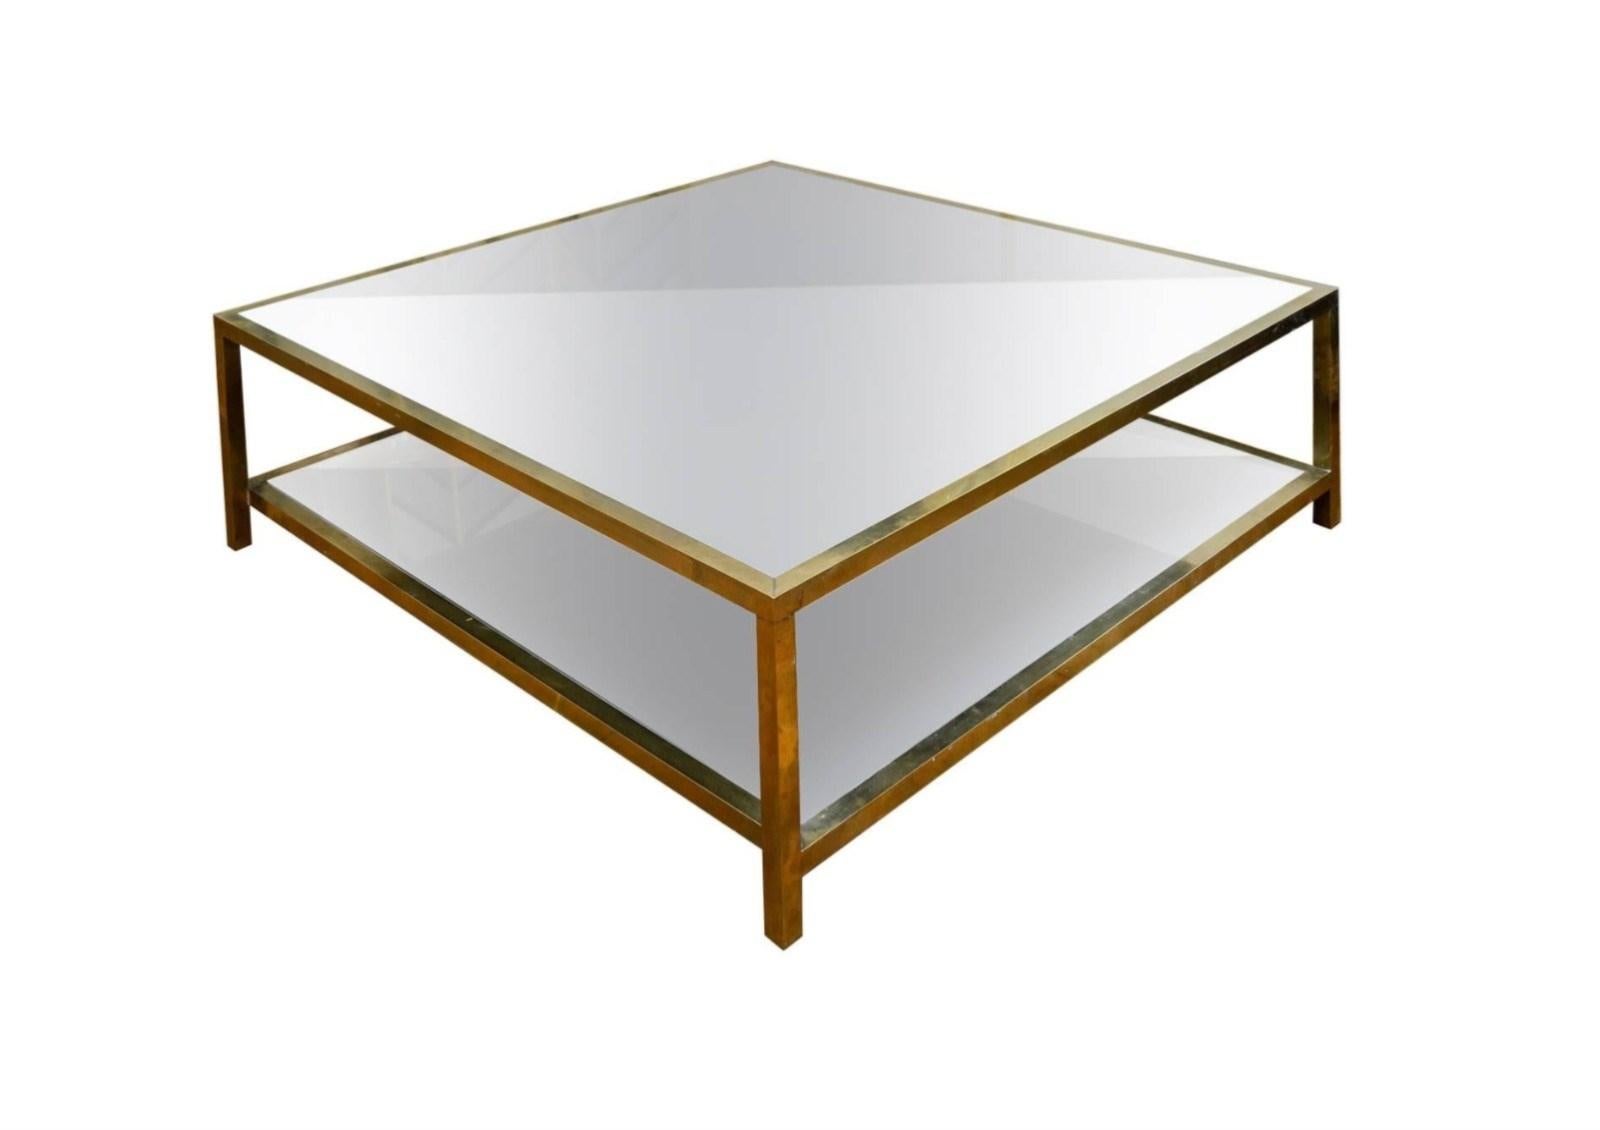 Cubic coffee table in brass and tainted mirrors.
France, 2015